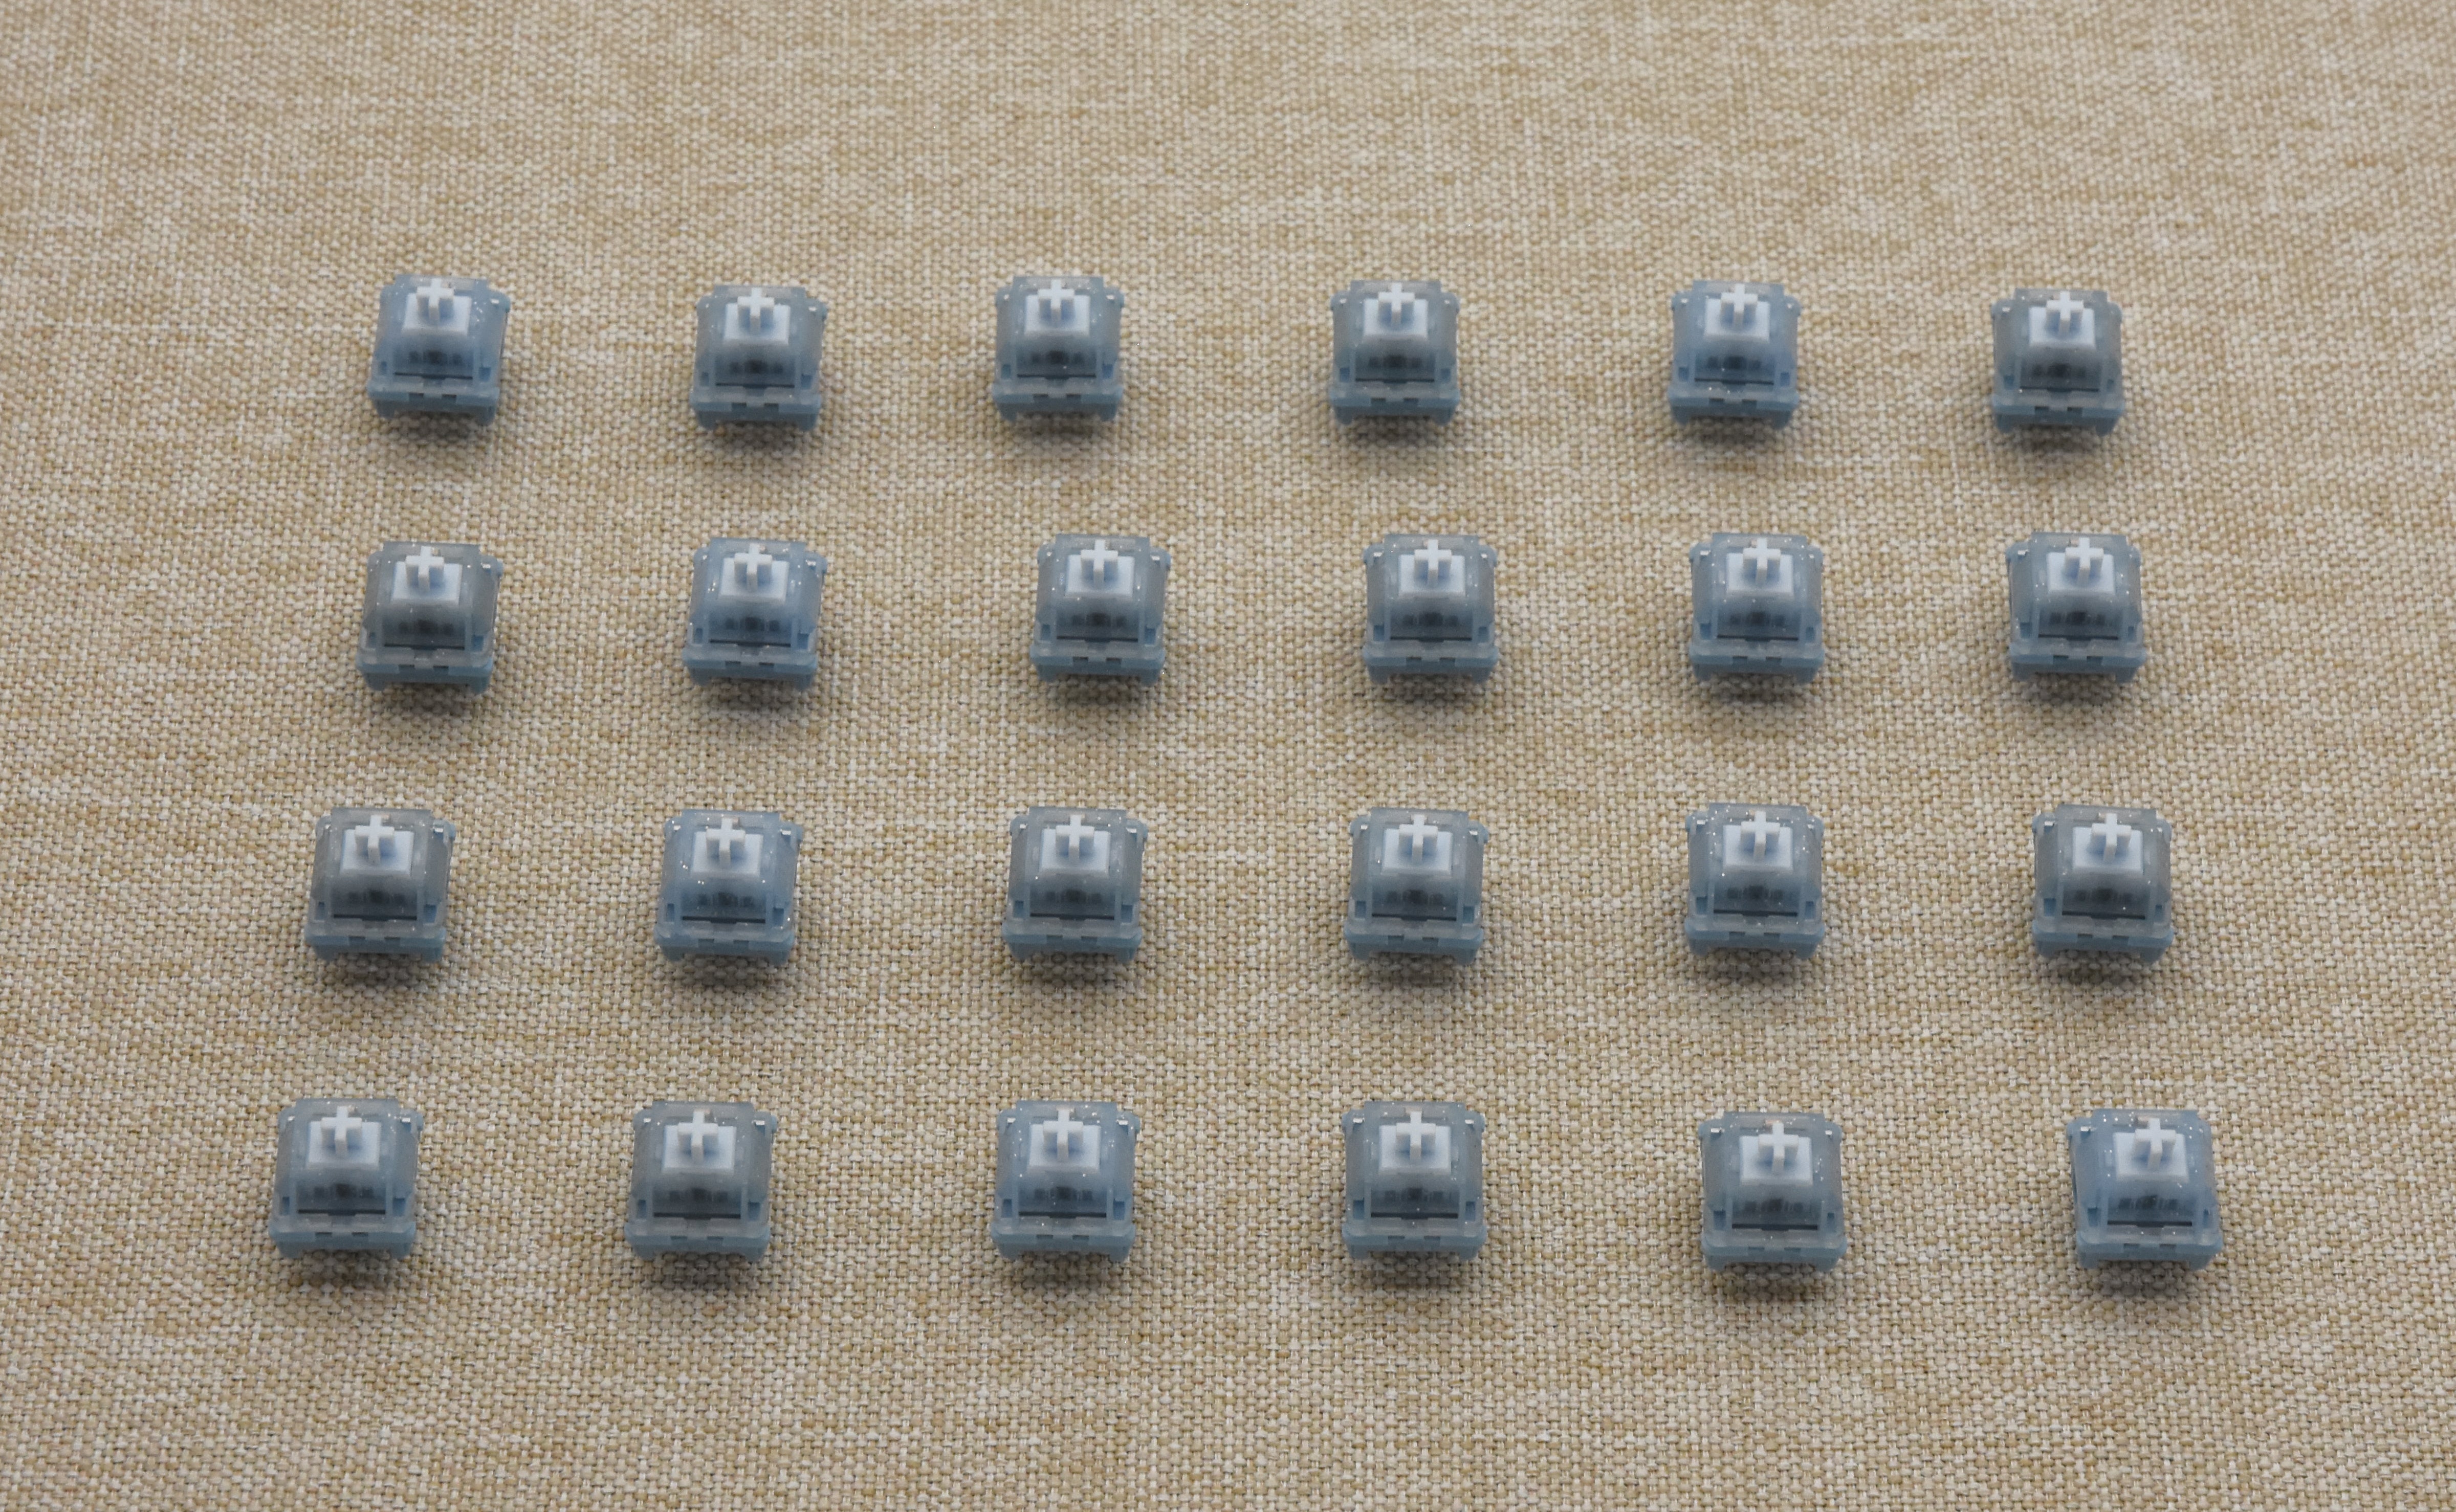 HMX BLUE TOPAZ LINEAR SWITCH FACTORY LUBED EDITION (10PCS)ni